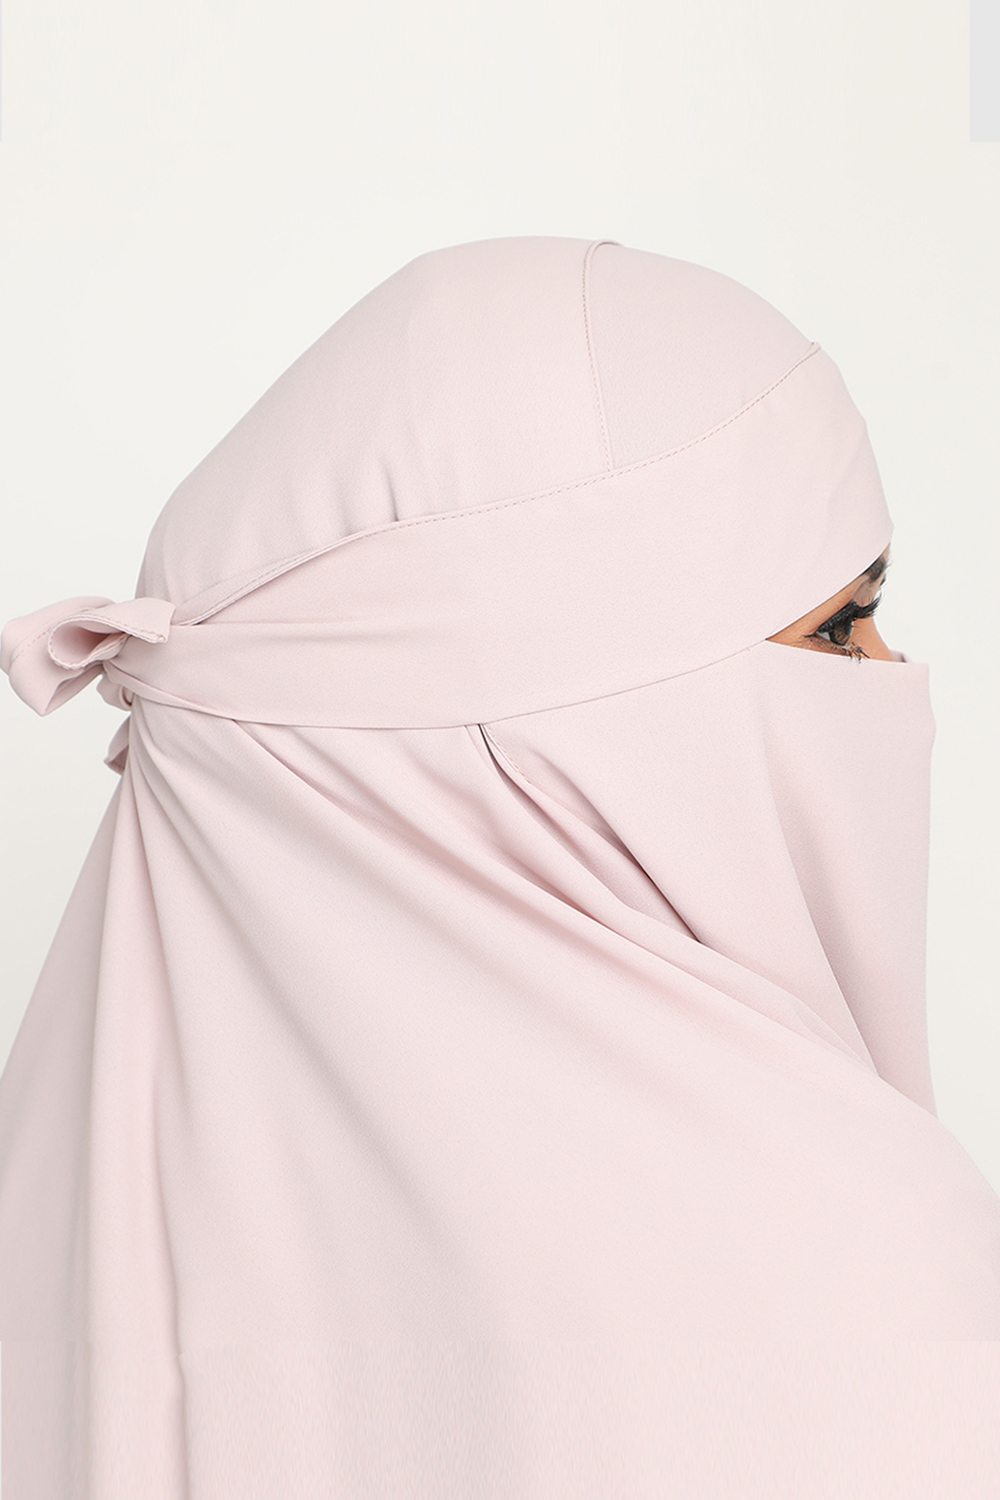 As-Is Niqab June Berry